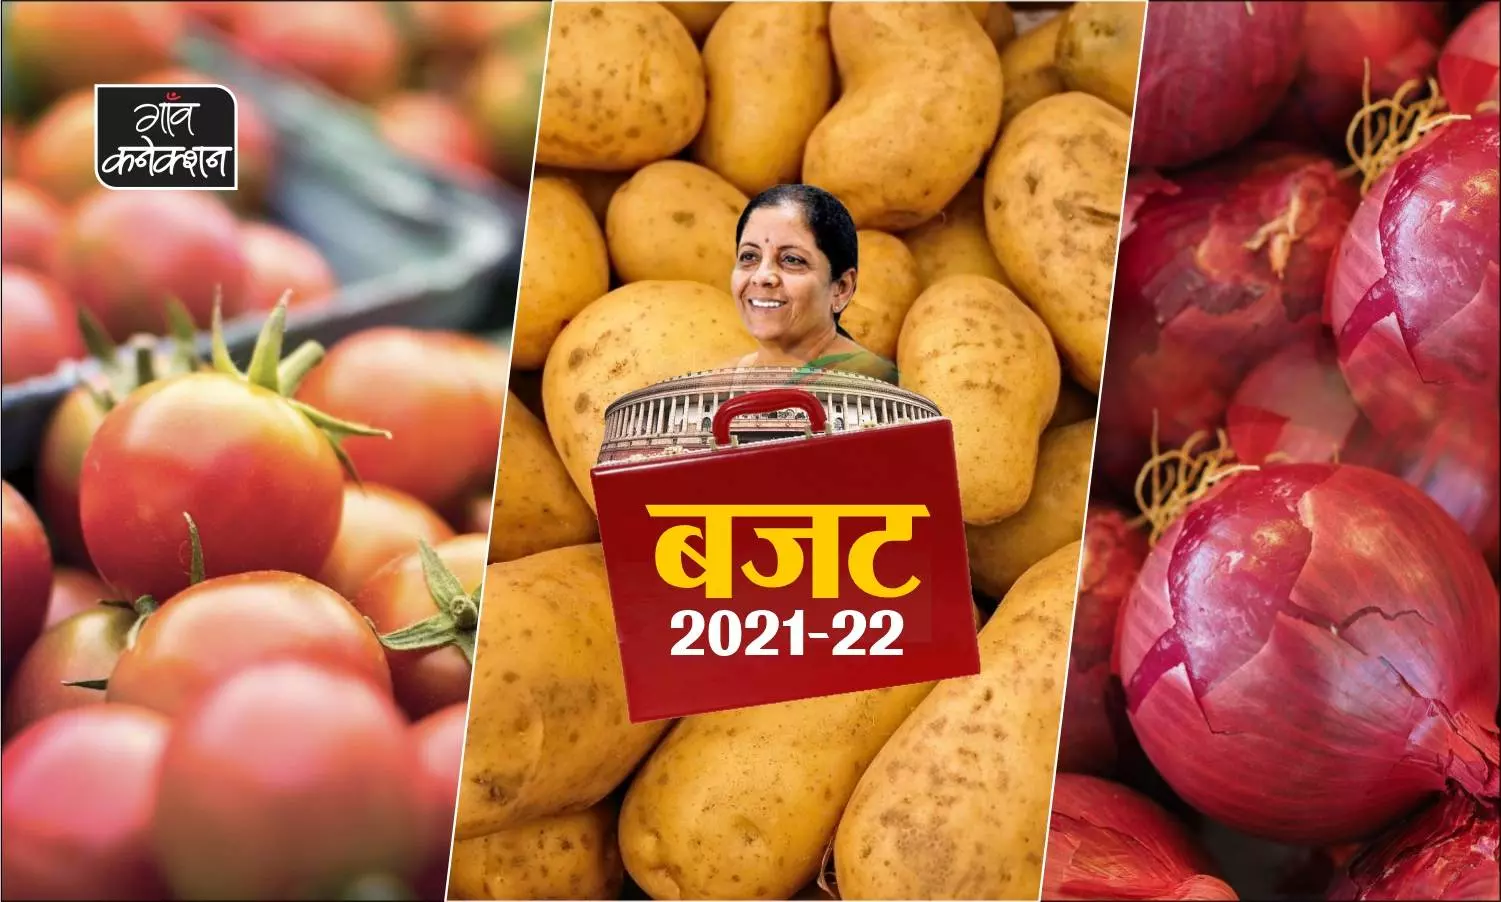 Aam budget News, Aam Budget 2021 Updates, latest Union Budget 2021 news, Budget 2021-22 India, What is special for farmers and agriculture sector in general budget, all updates and news in Hindi, Agriculture Sector and General Budget